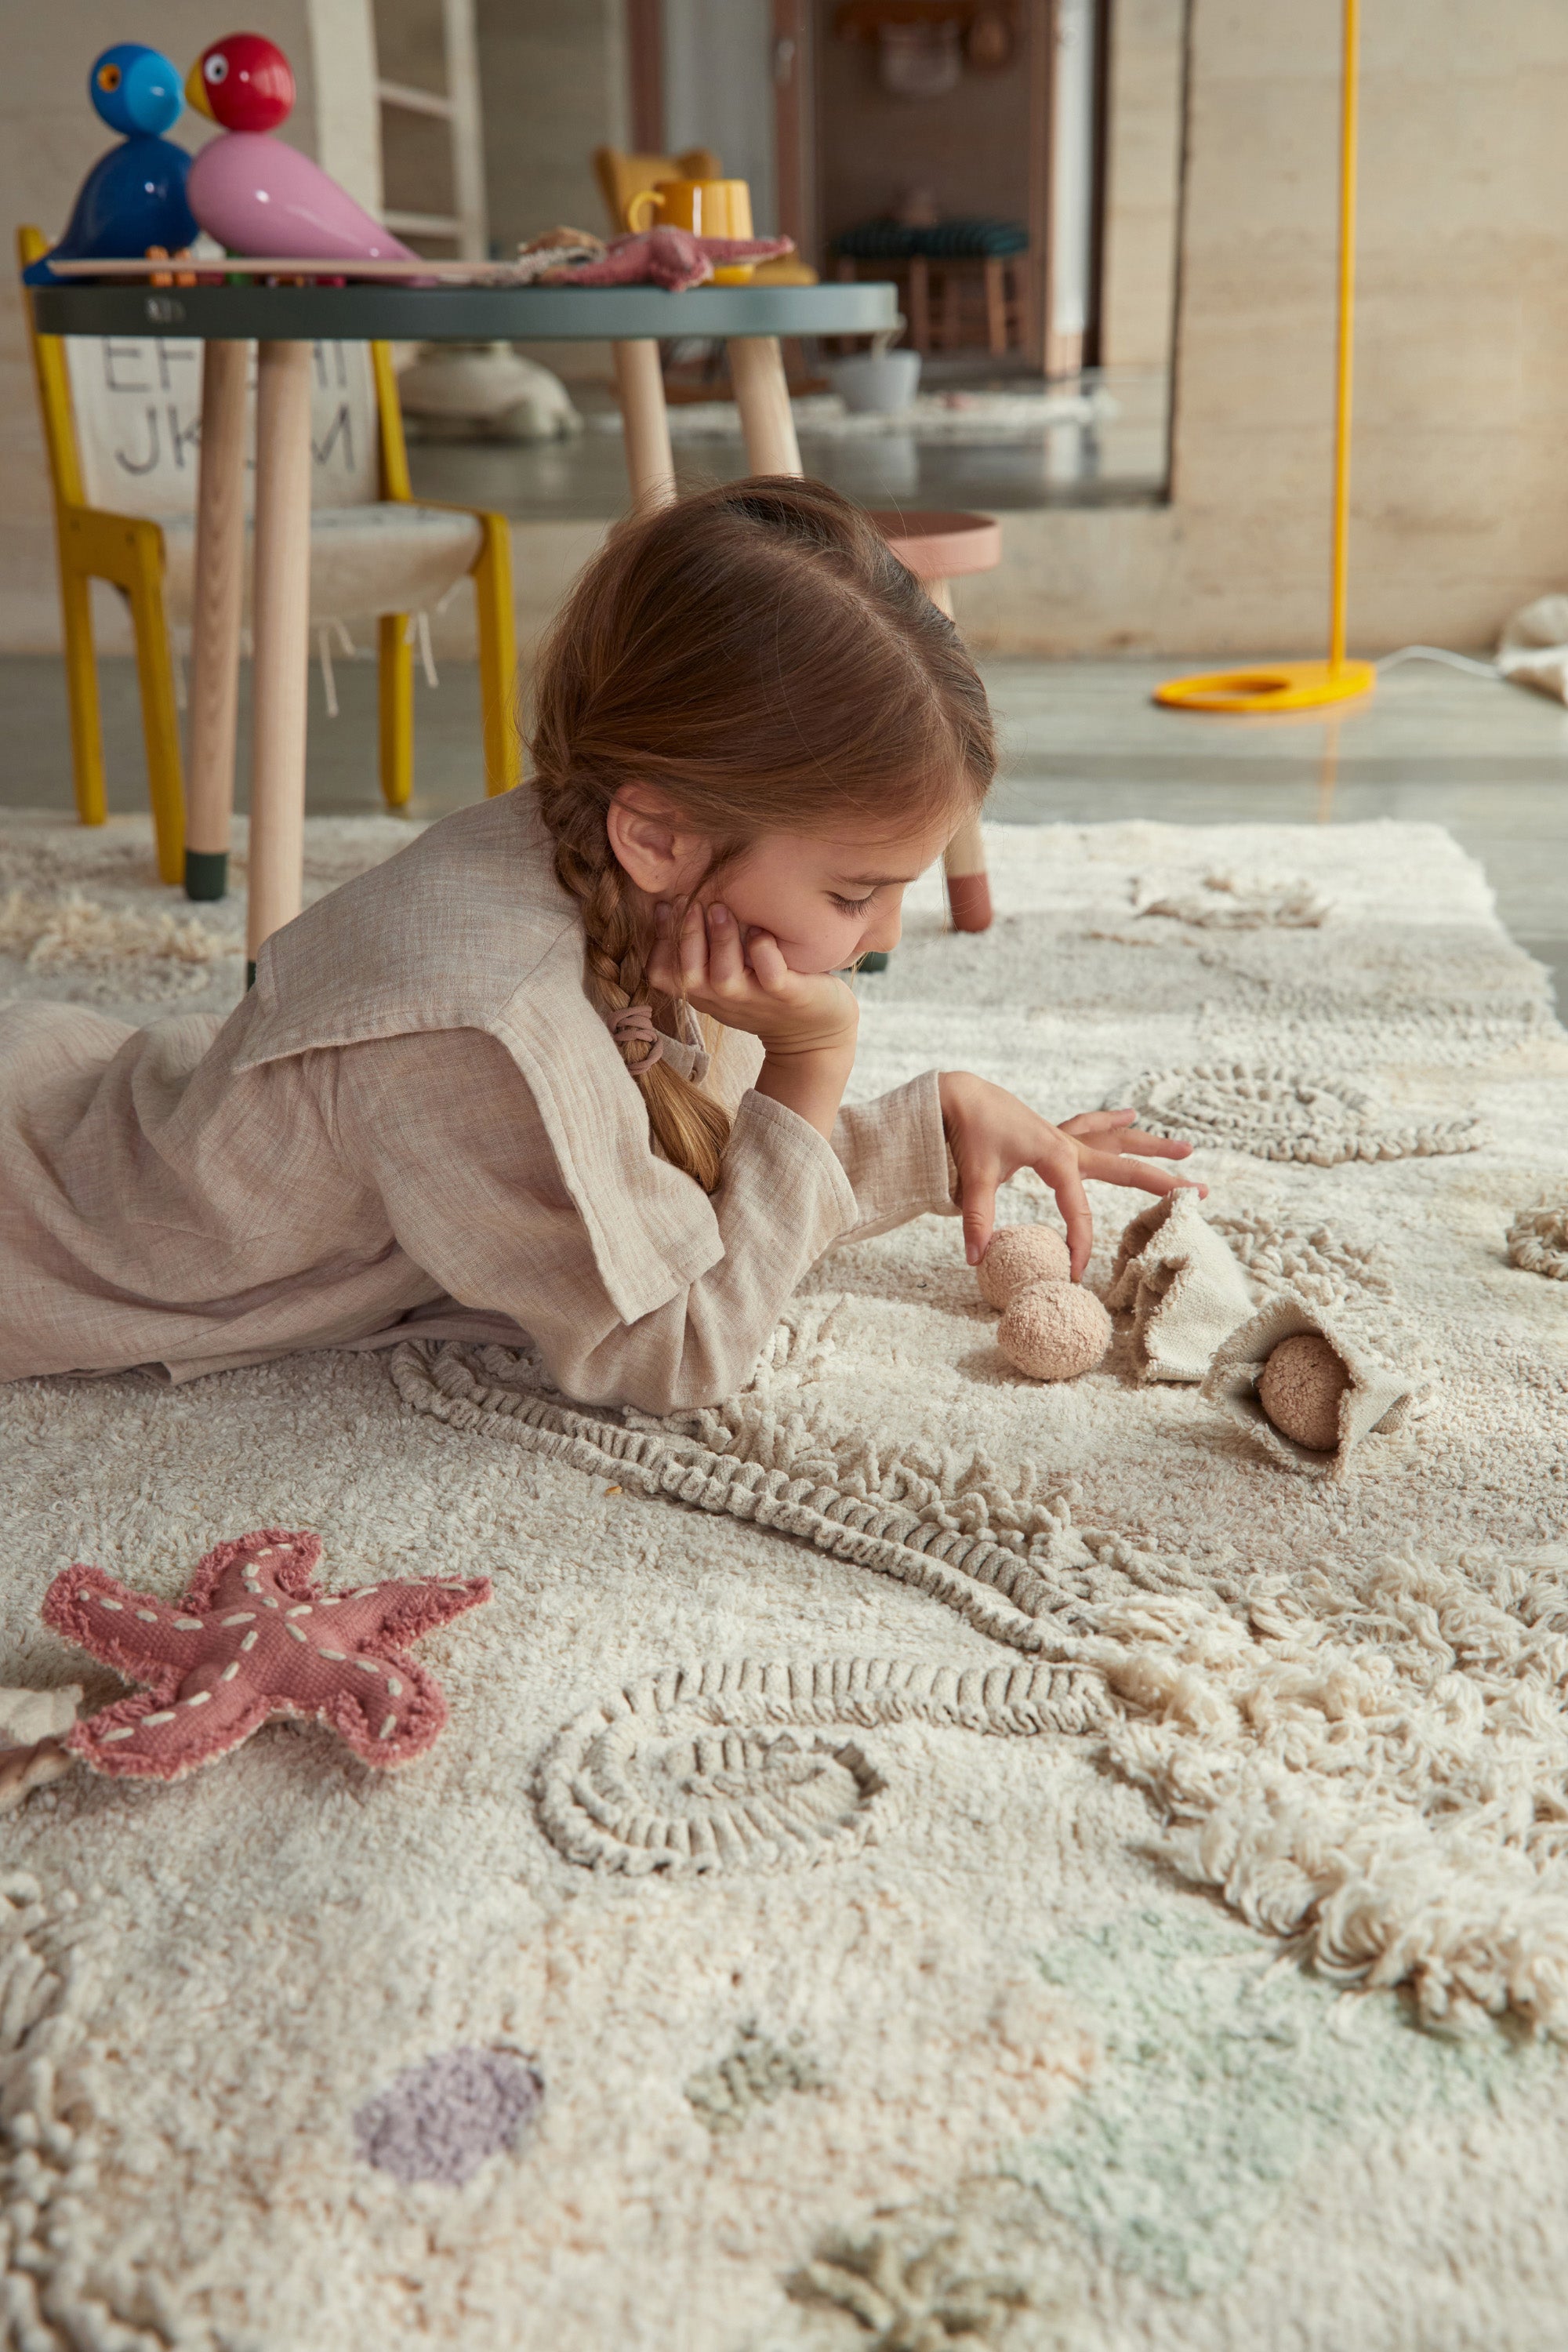 Cream seabed-inspired rug with added sea creature toys